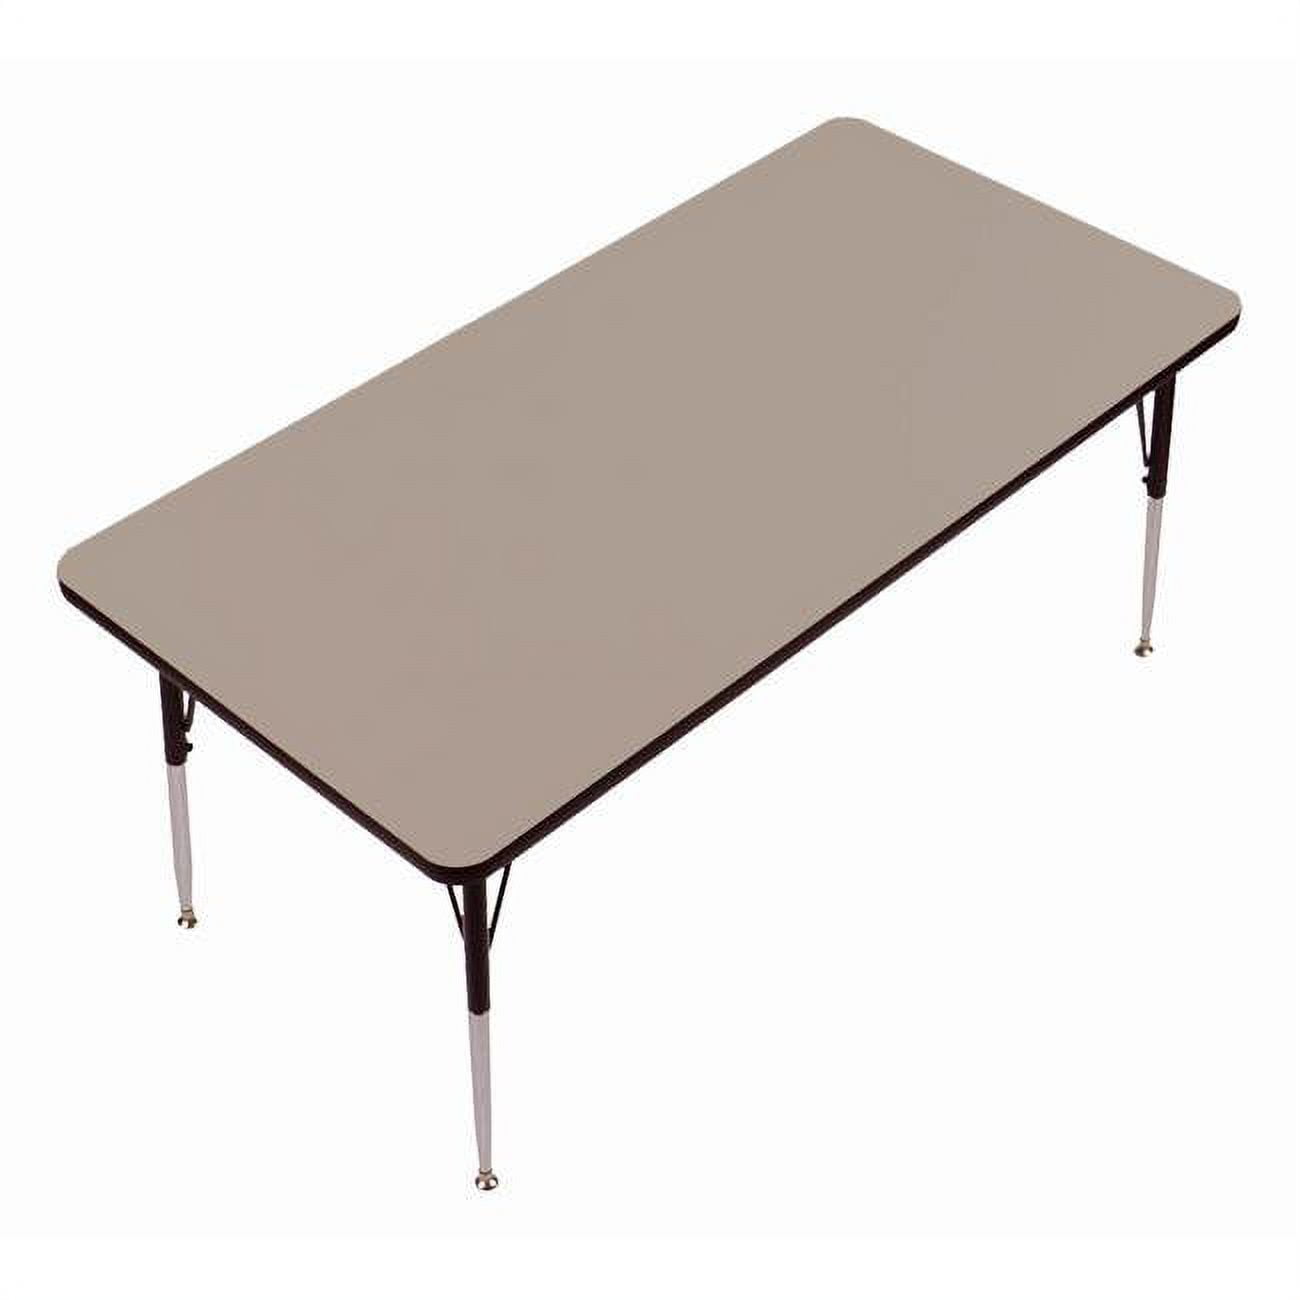 A60-rnds-54 1.25 In. High Pressure Top Round Activity Tables, Savannah Sand - 60 In.